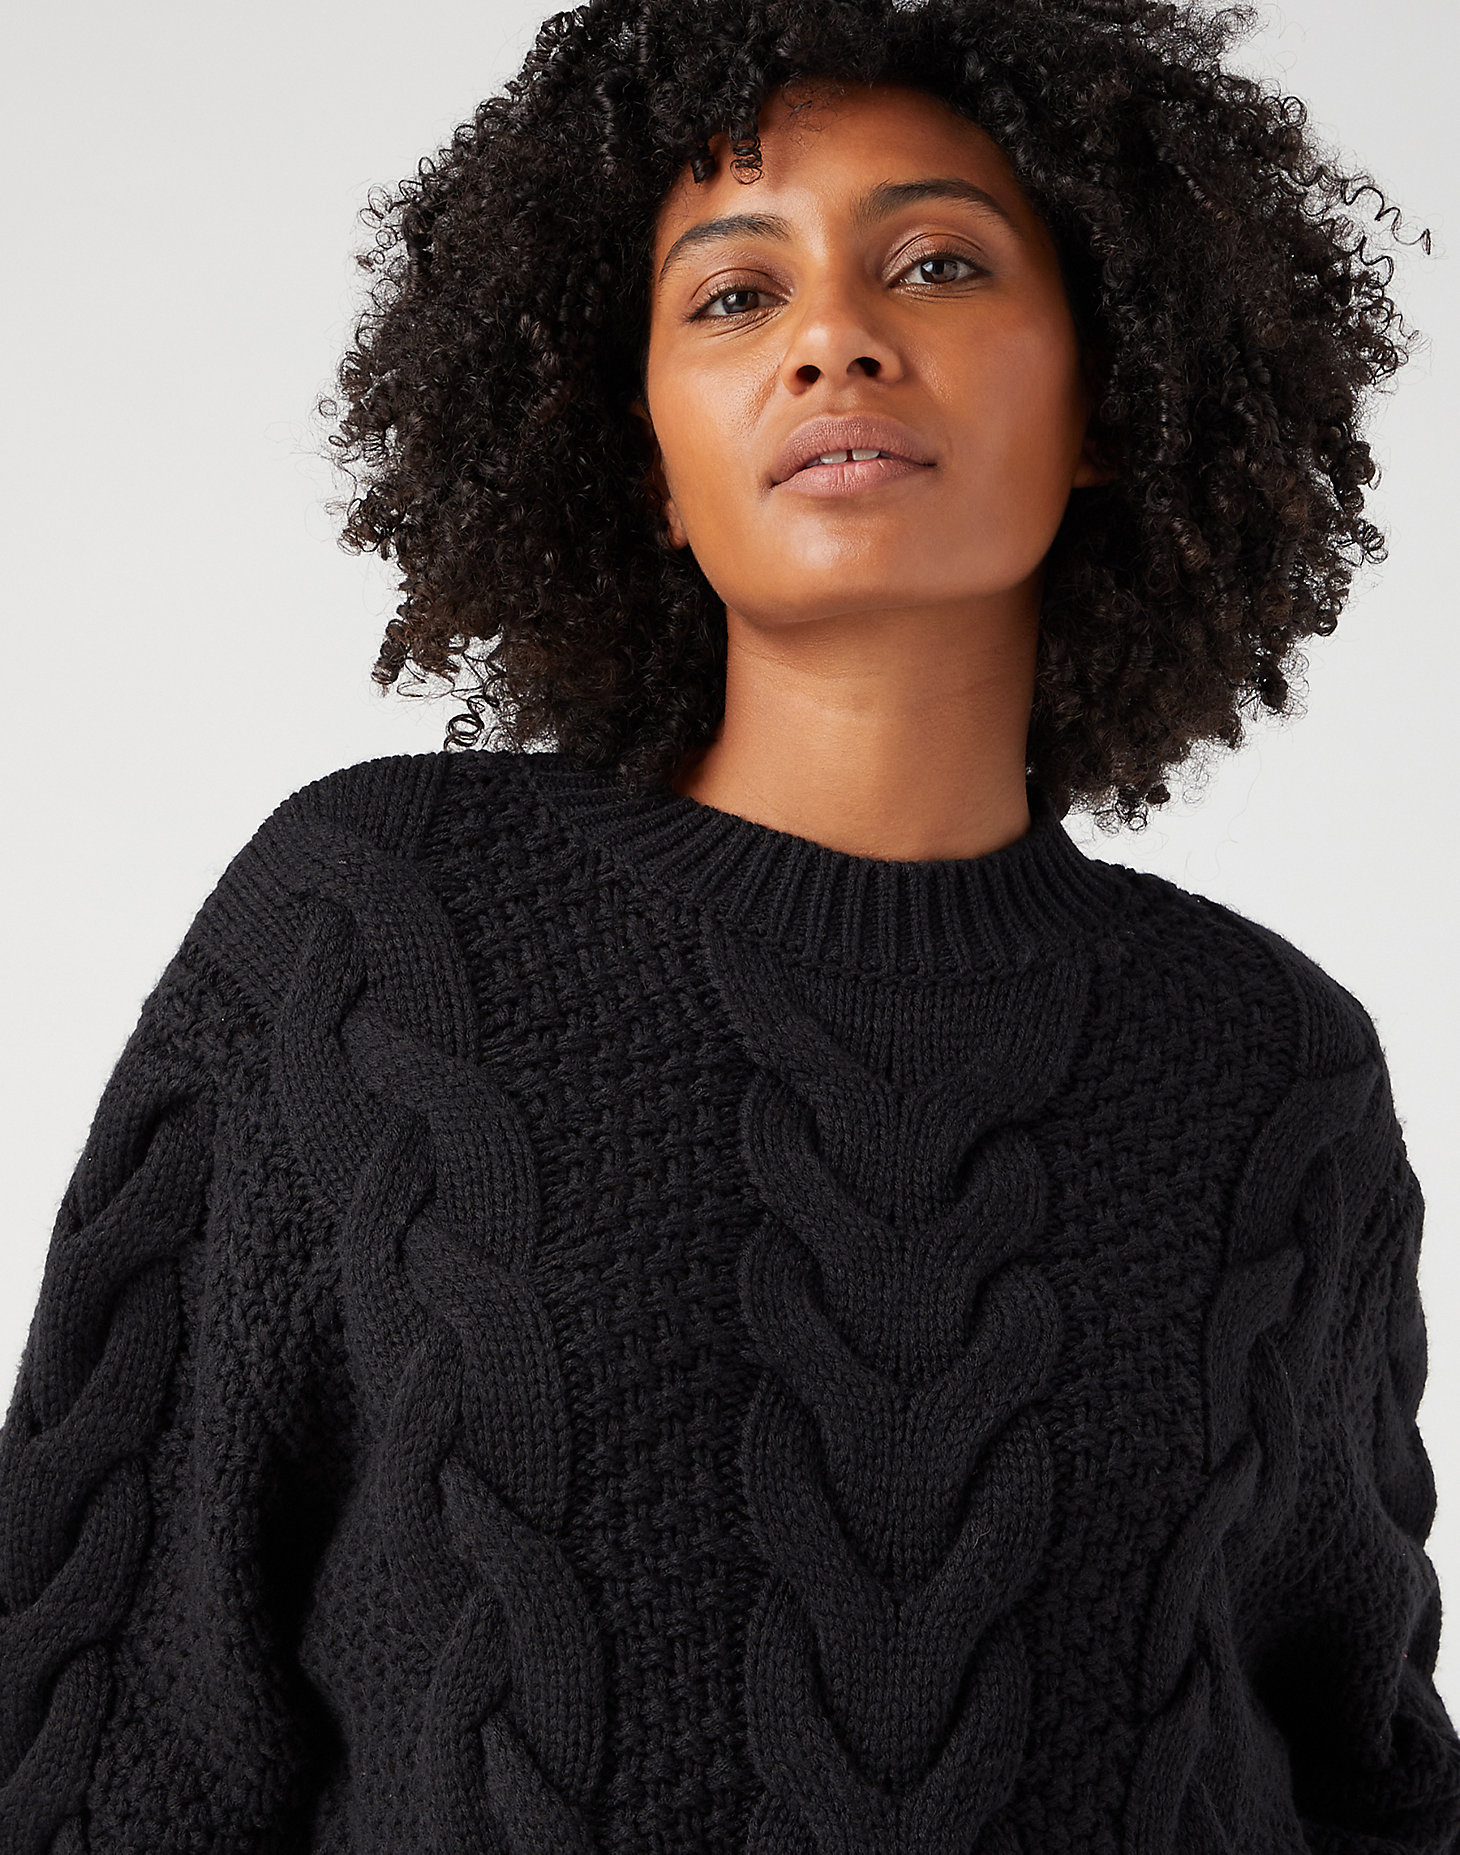 Crew Neck Cable Knit in Black alternative view 3